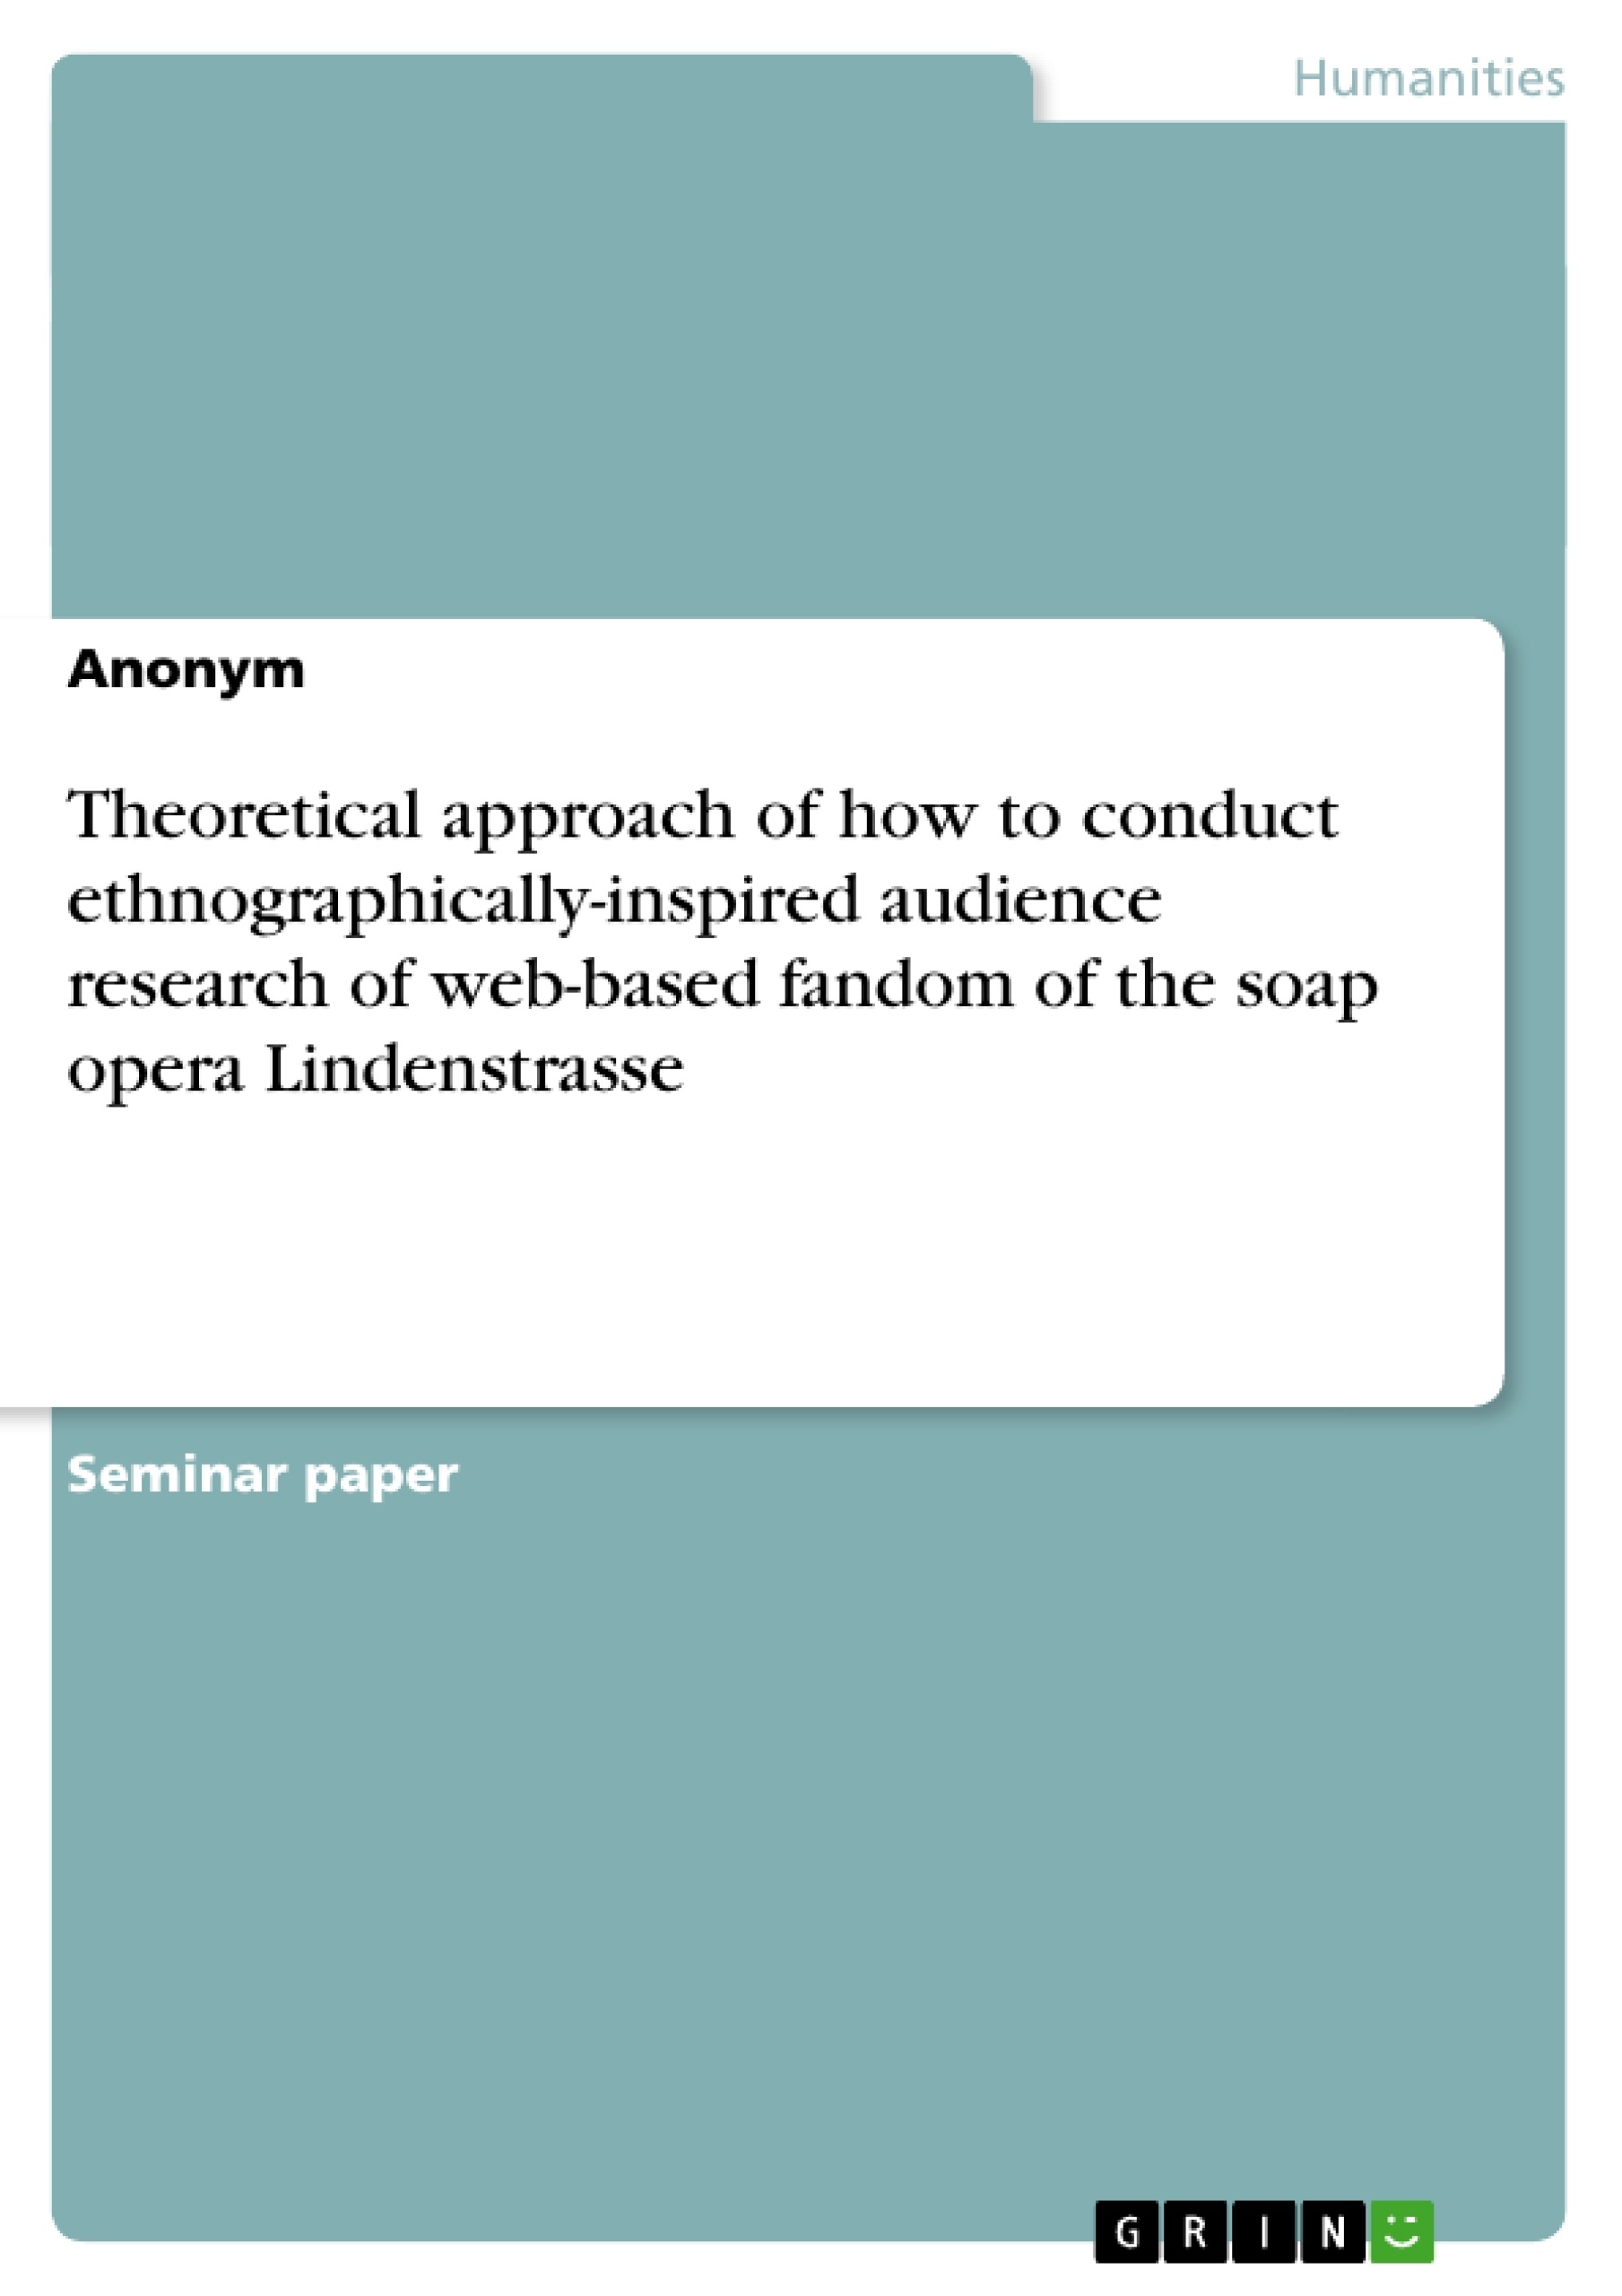 Titre: Theoretical approach of how to conduct ethnographically-inspired audience research of web-based fandom of the soap opera Lindenstrasse